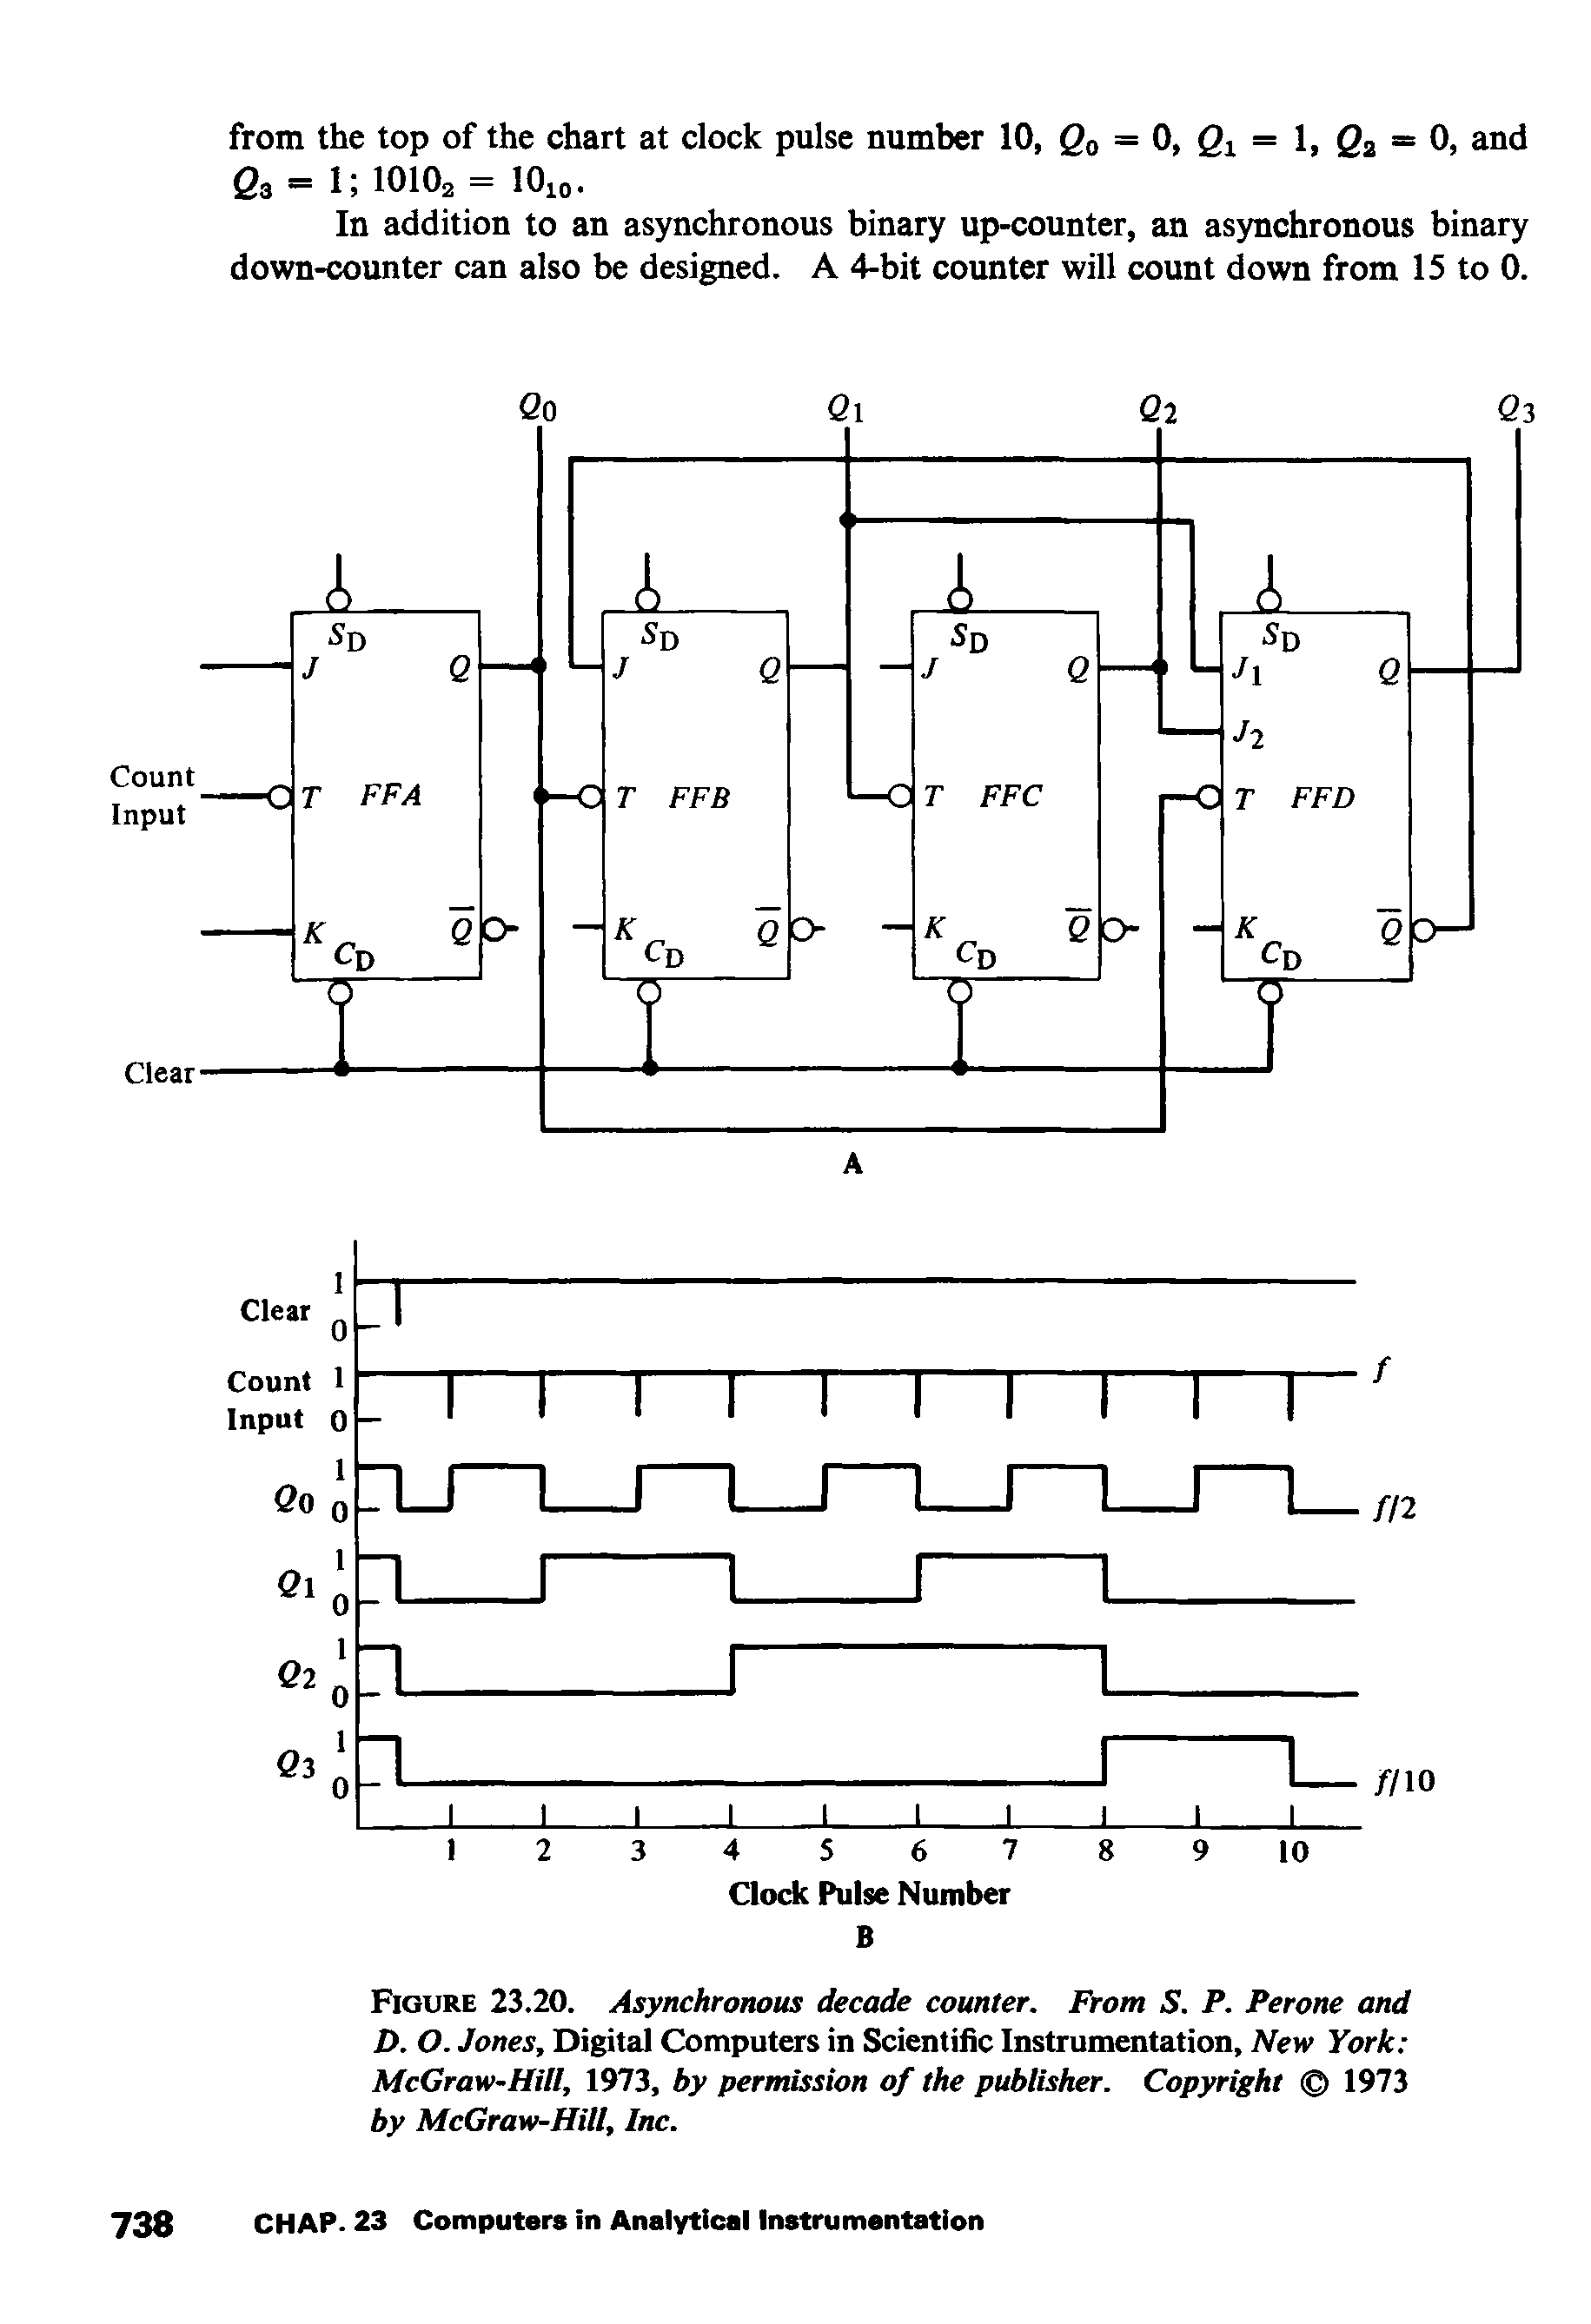 Figure 23.20. Asynchronous decade counter. From S. P. Perone and D. O. Jones, Digital Computers in Scientific Instrumentation, New York McGraw-Hill, 1973, by permission of the publisher. Copyright 1973 by McGraw-Hill, Inc.